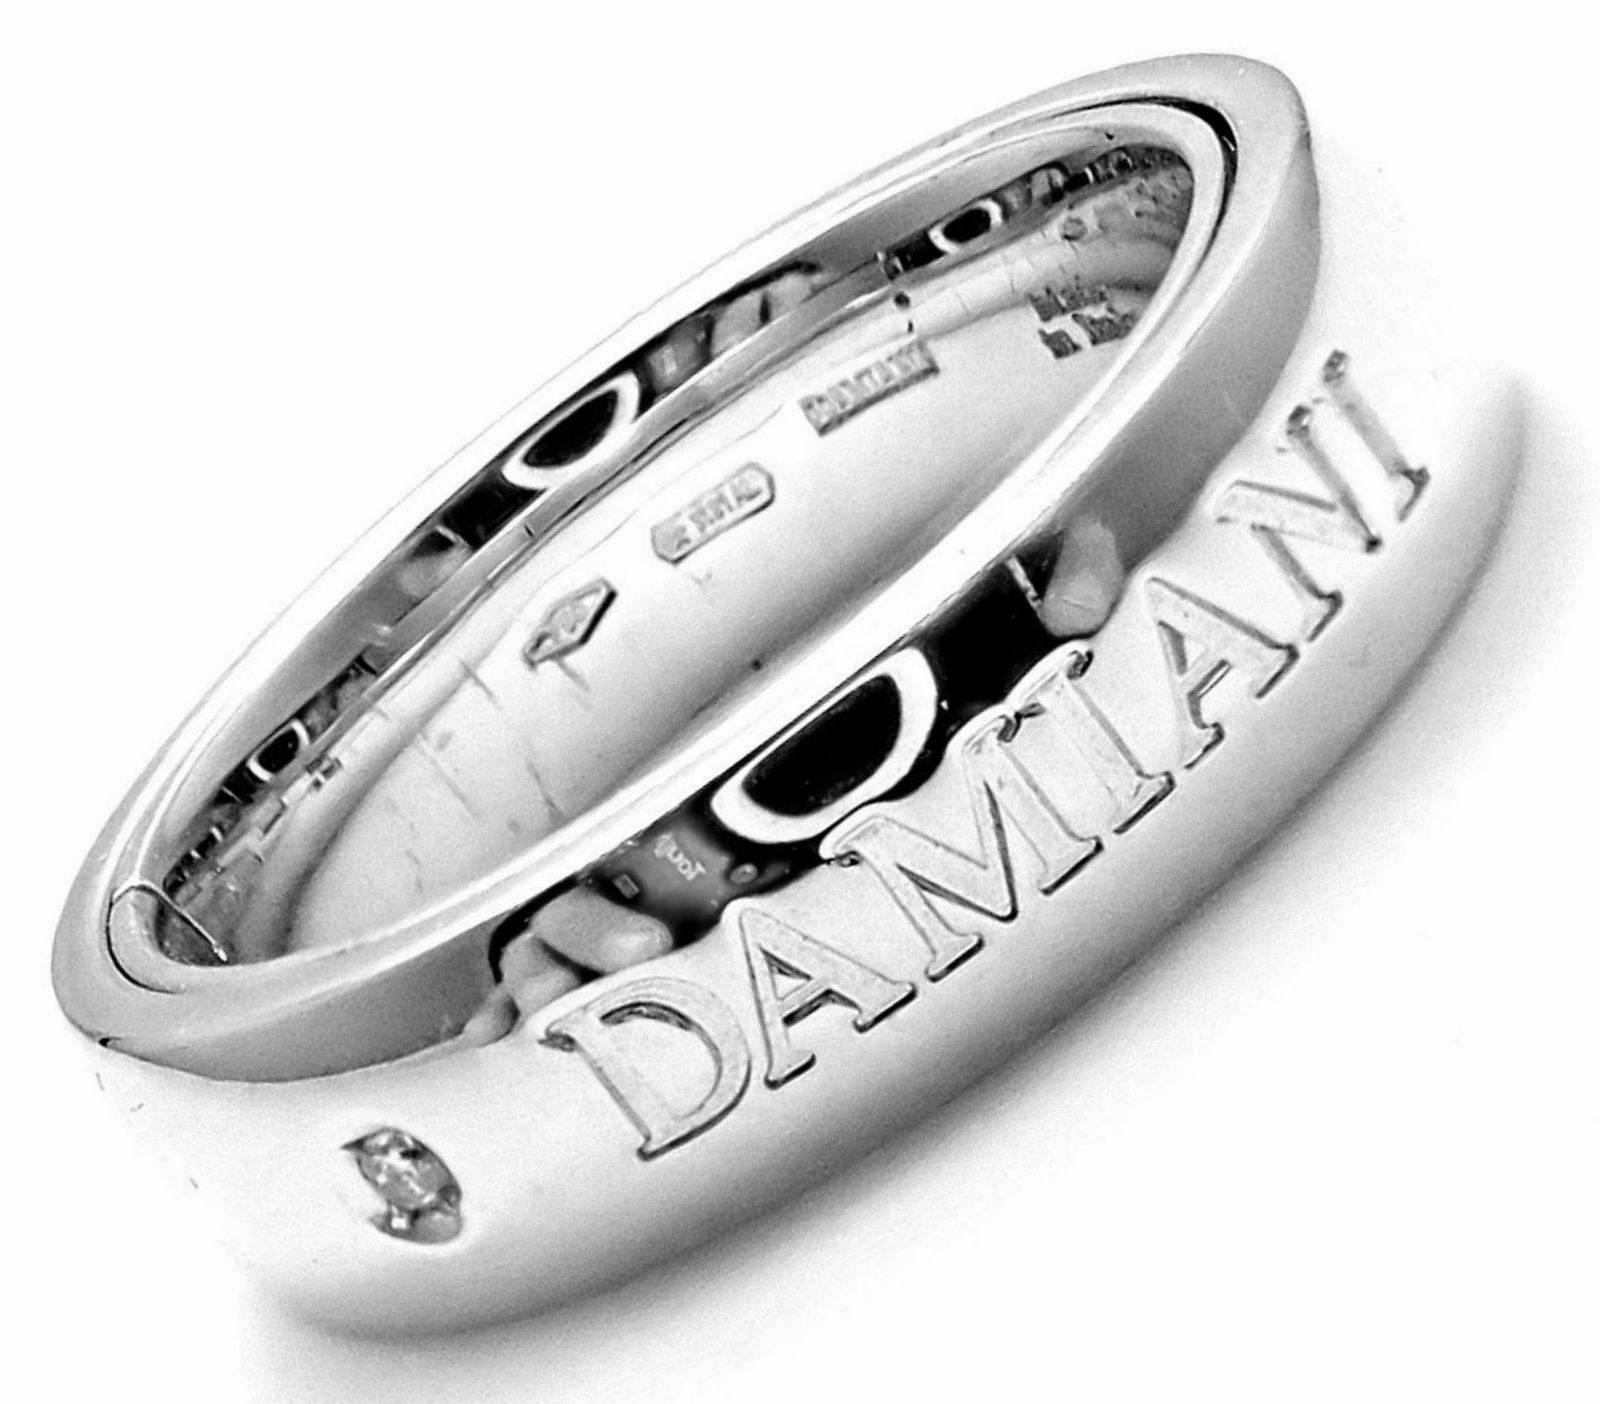 18k White Gold Diamond Double Band Ring by Damiani.
With 2 round old European cut diamond E-G color, VS-SI clarity total weight approx. .05ct on inside of the band.
This ring comes with Damiani Box + Paperwork.
Details:
Size:  7
Weight: 11